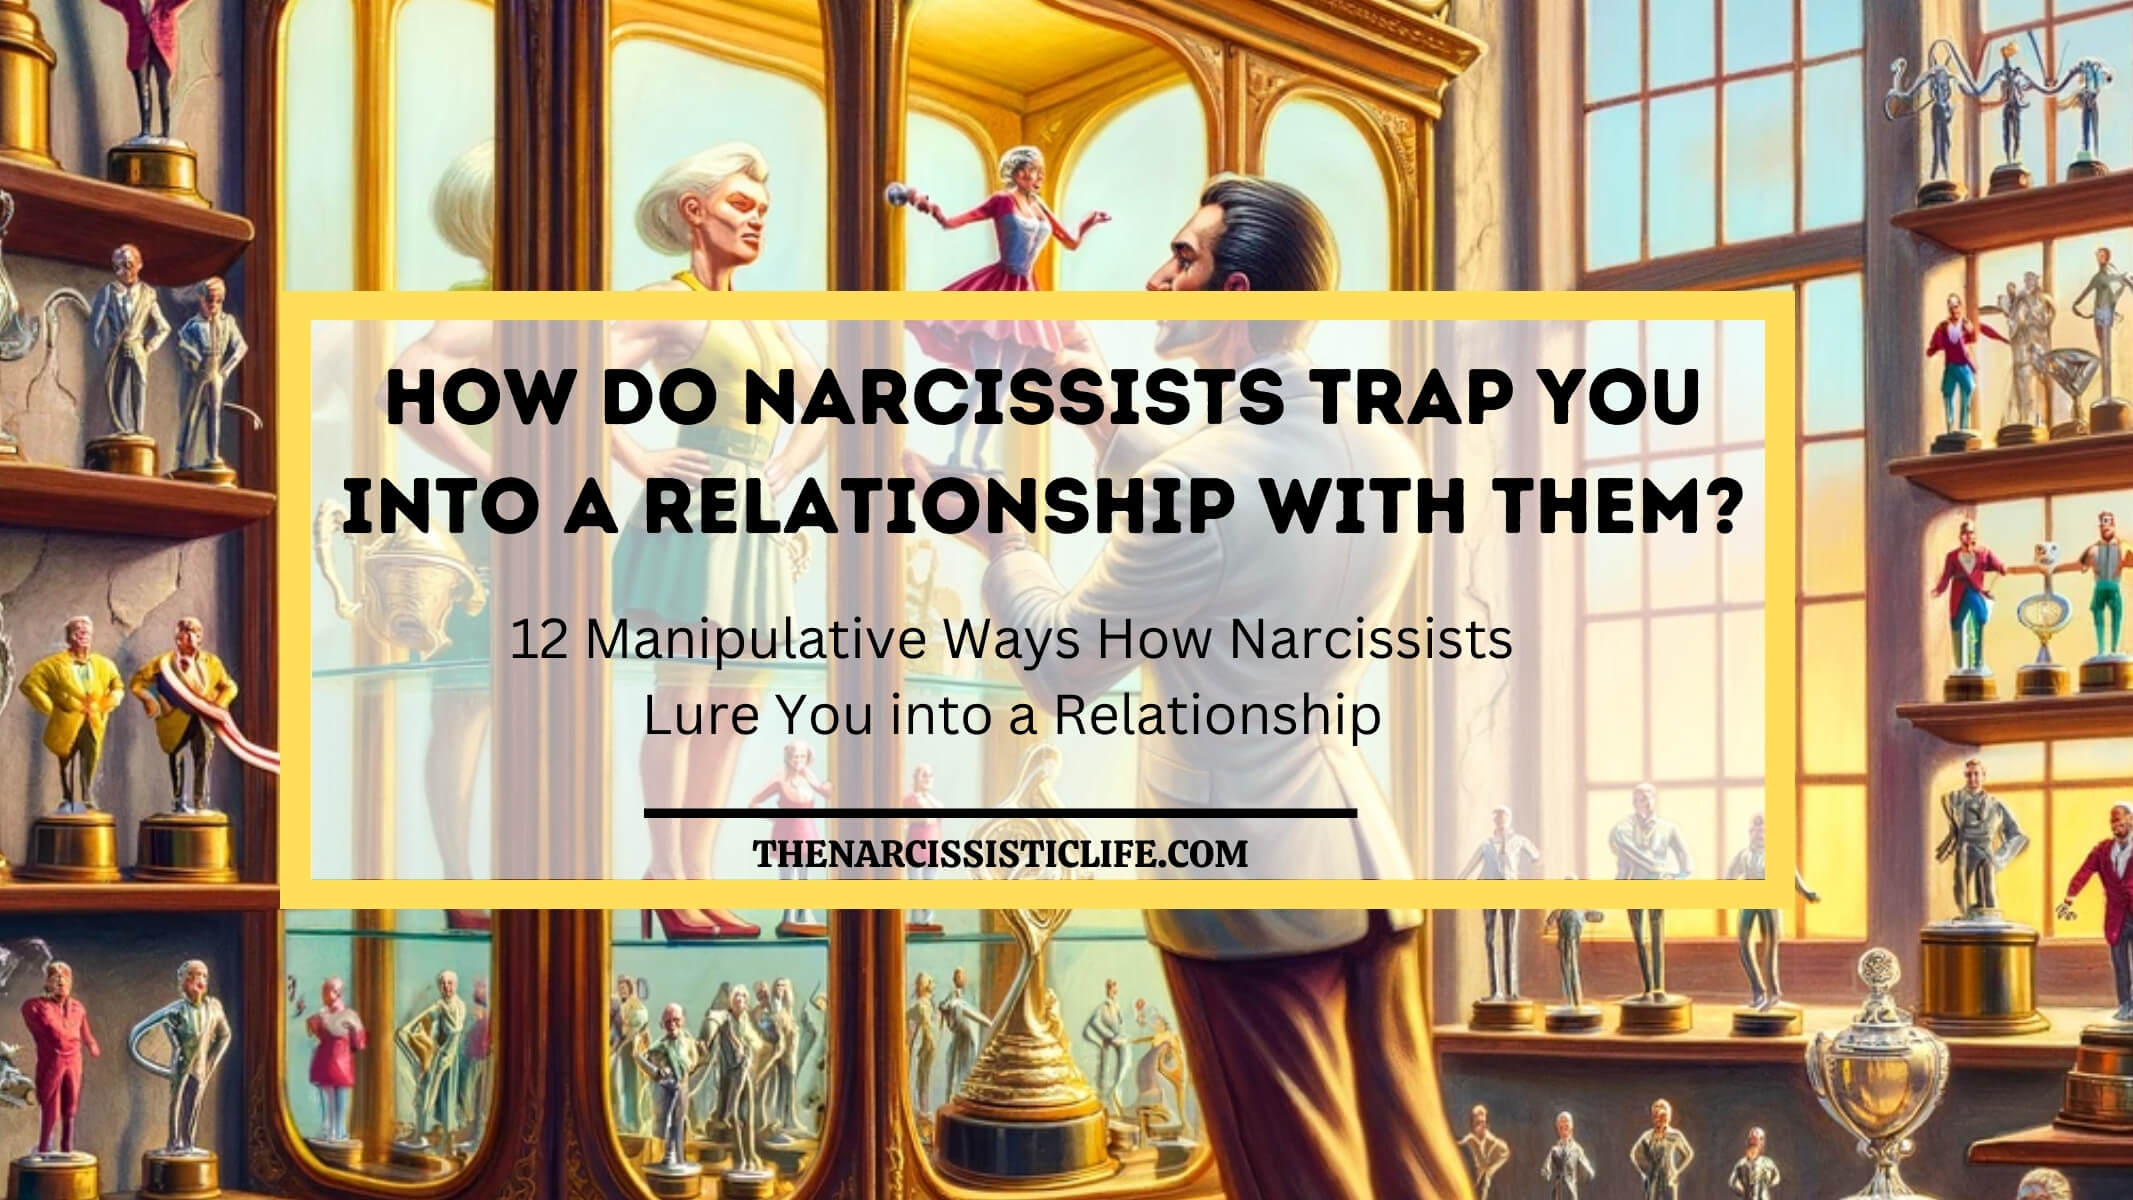 how do narcissists trap you into a relationship with them?